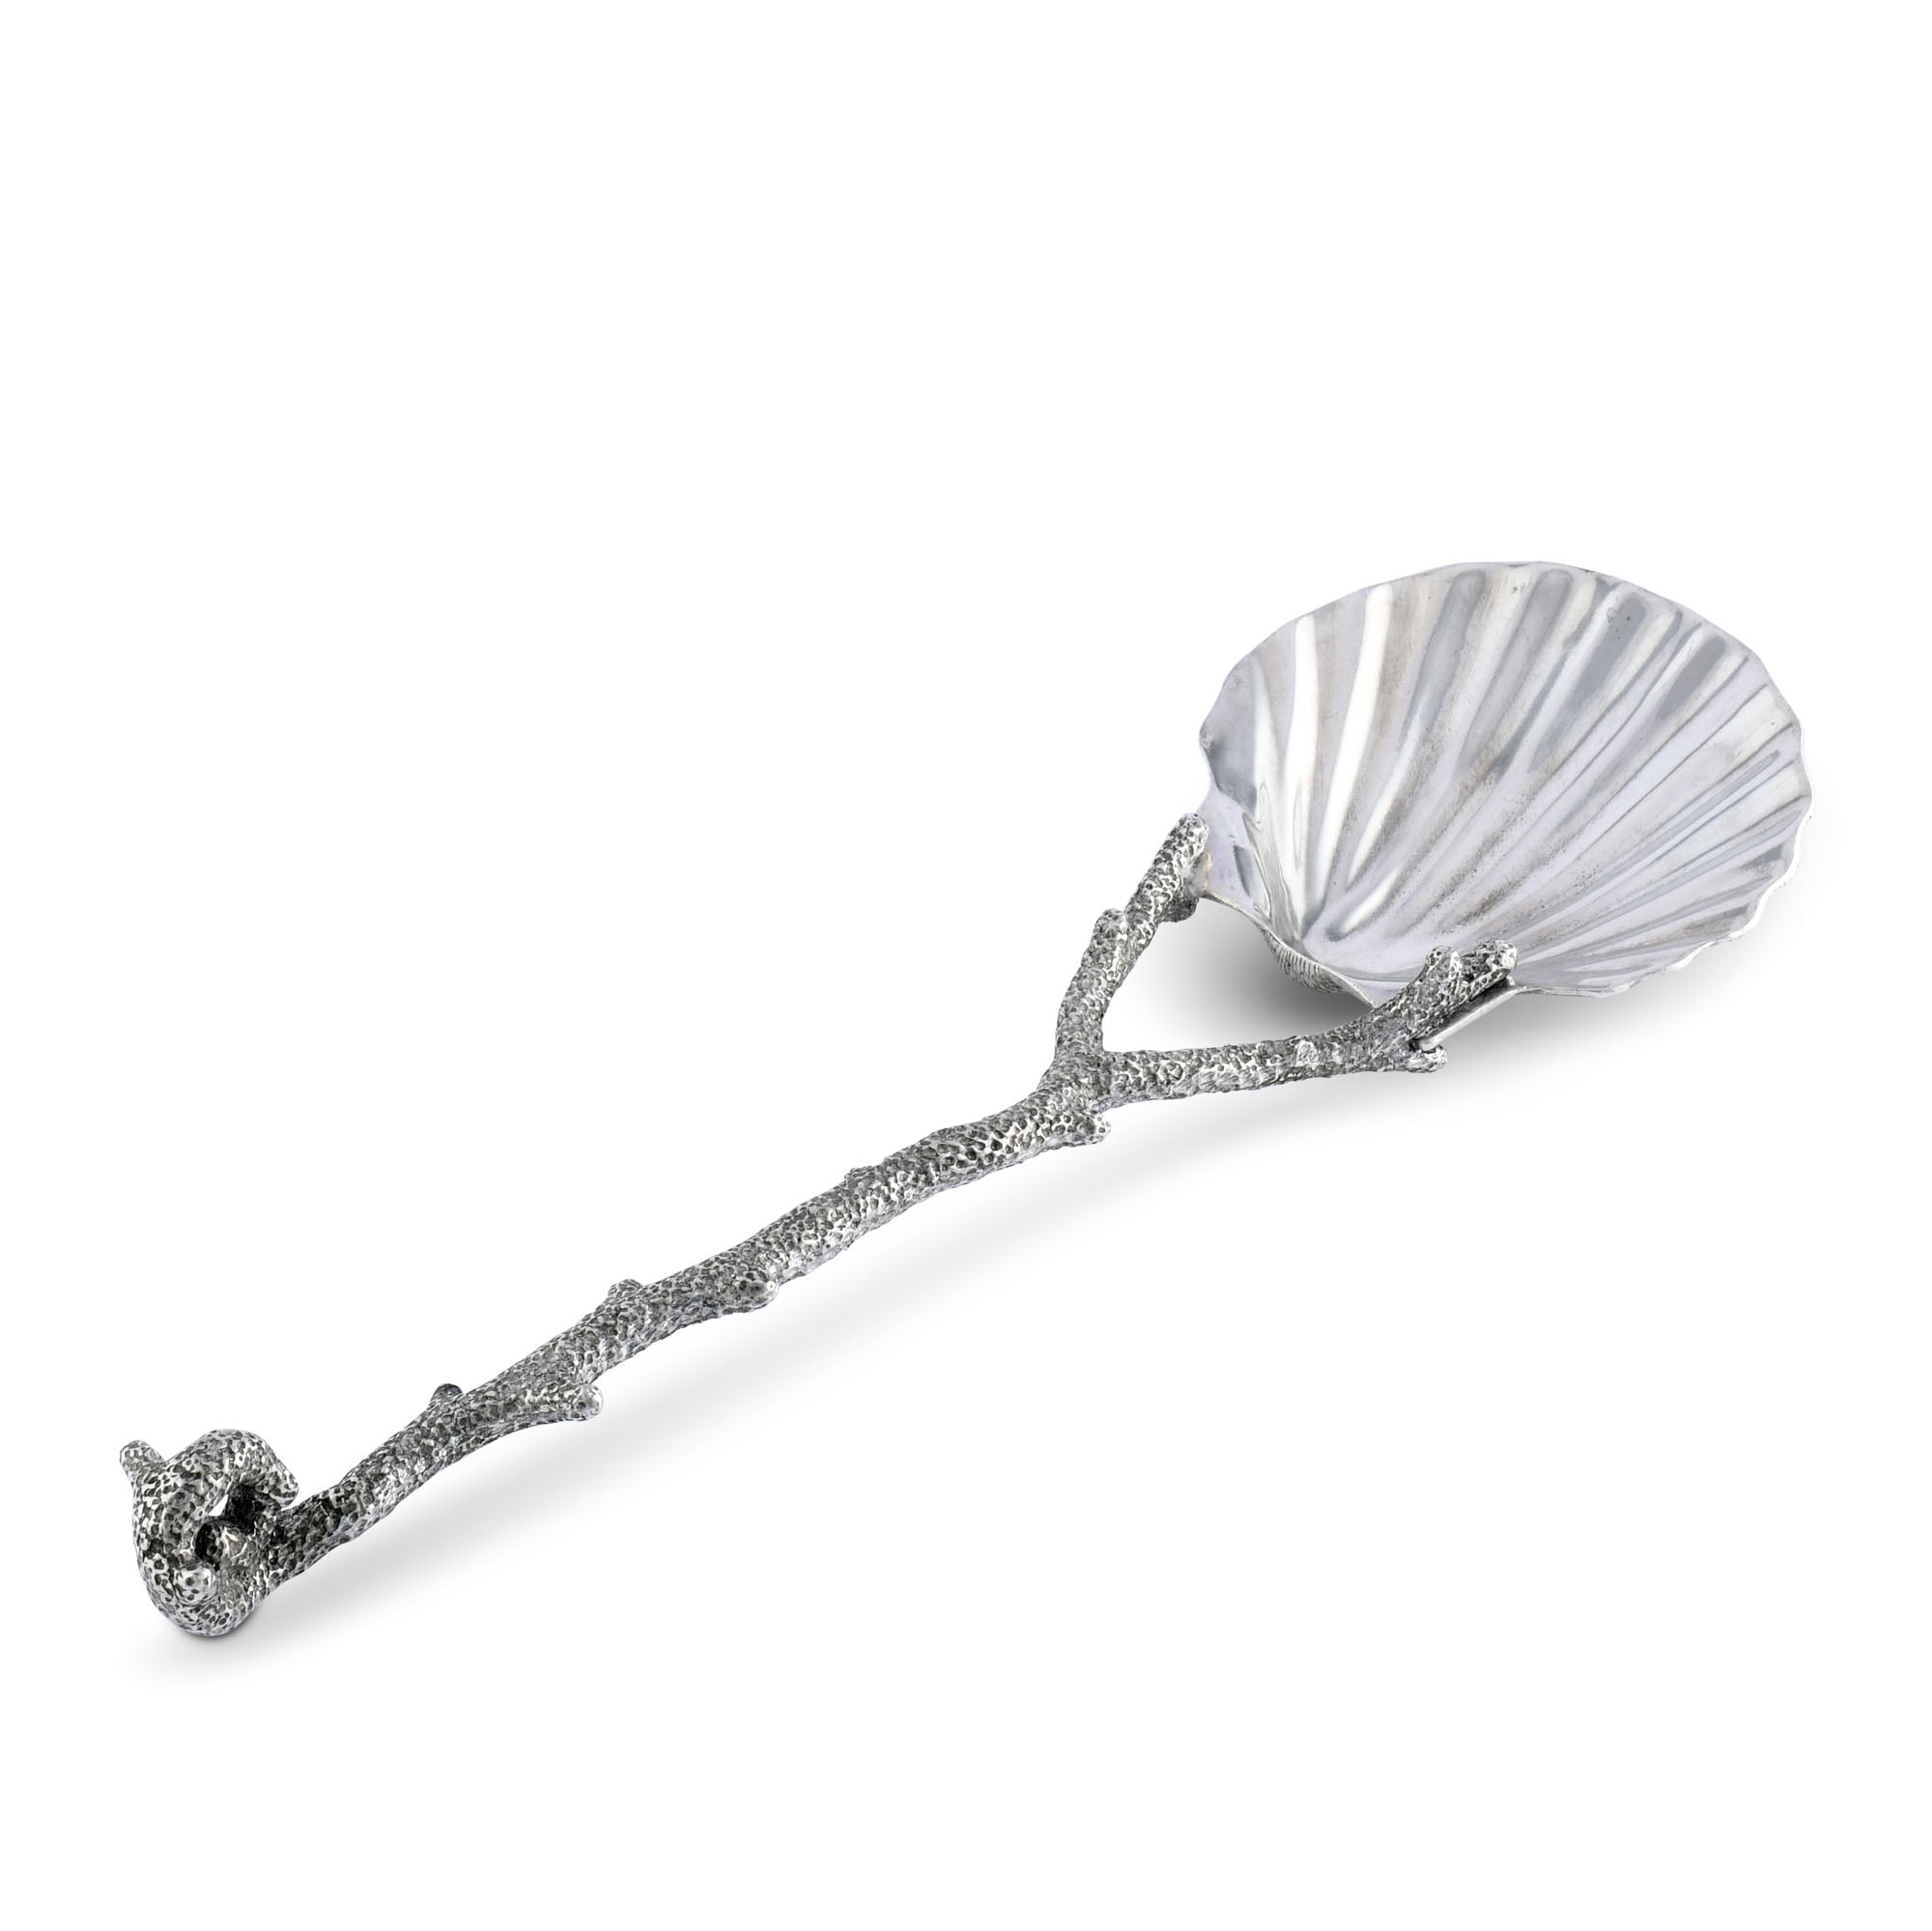 Vagabond House Scallop Shell Coral Serving Spoon Product Image